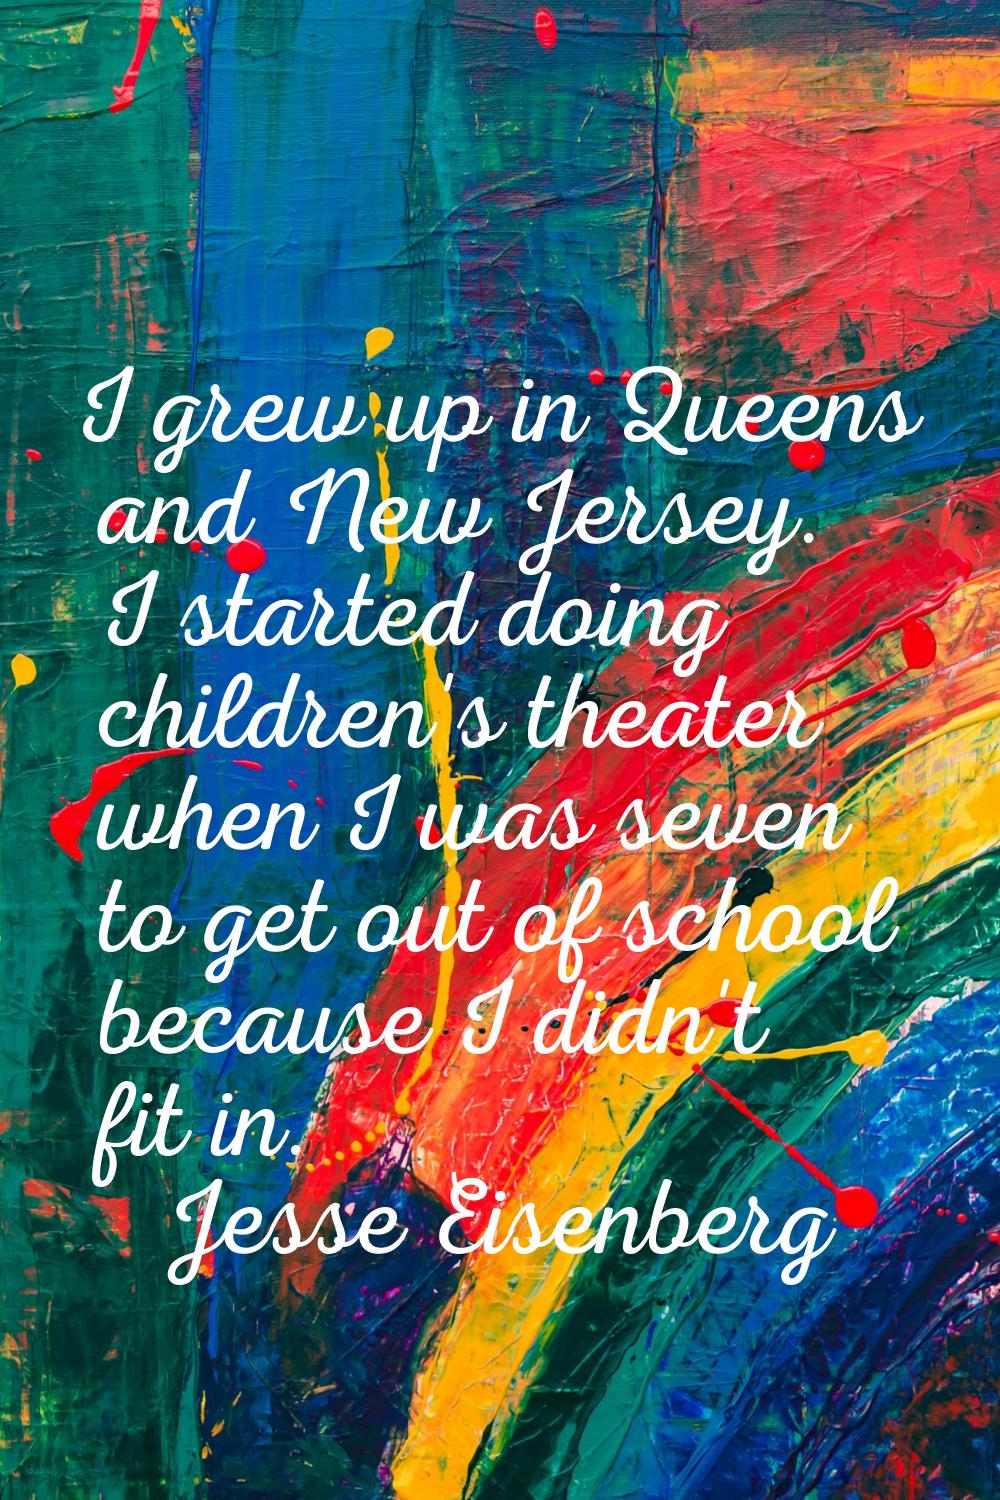 I grew up in Queens and New Jersey. I started doing children's theater when I was seven to get out 